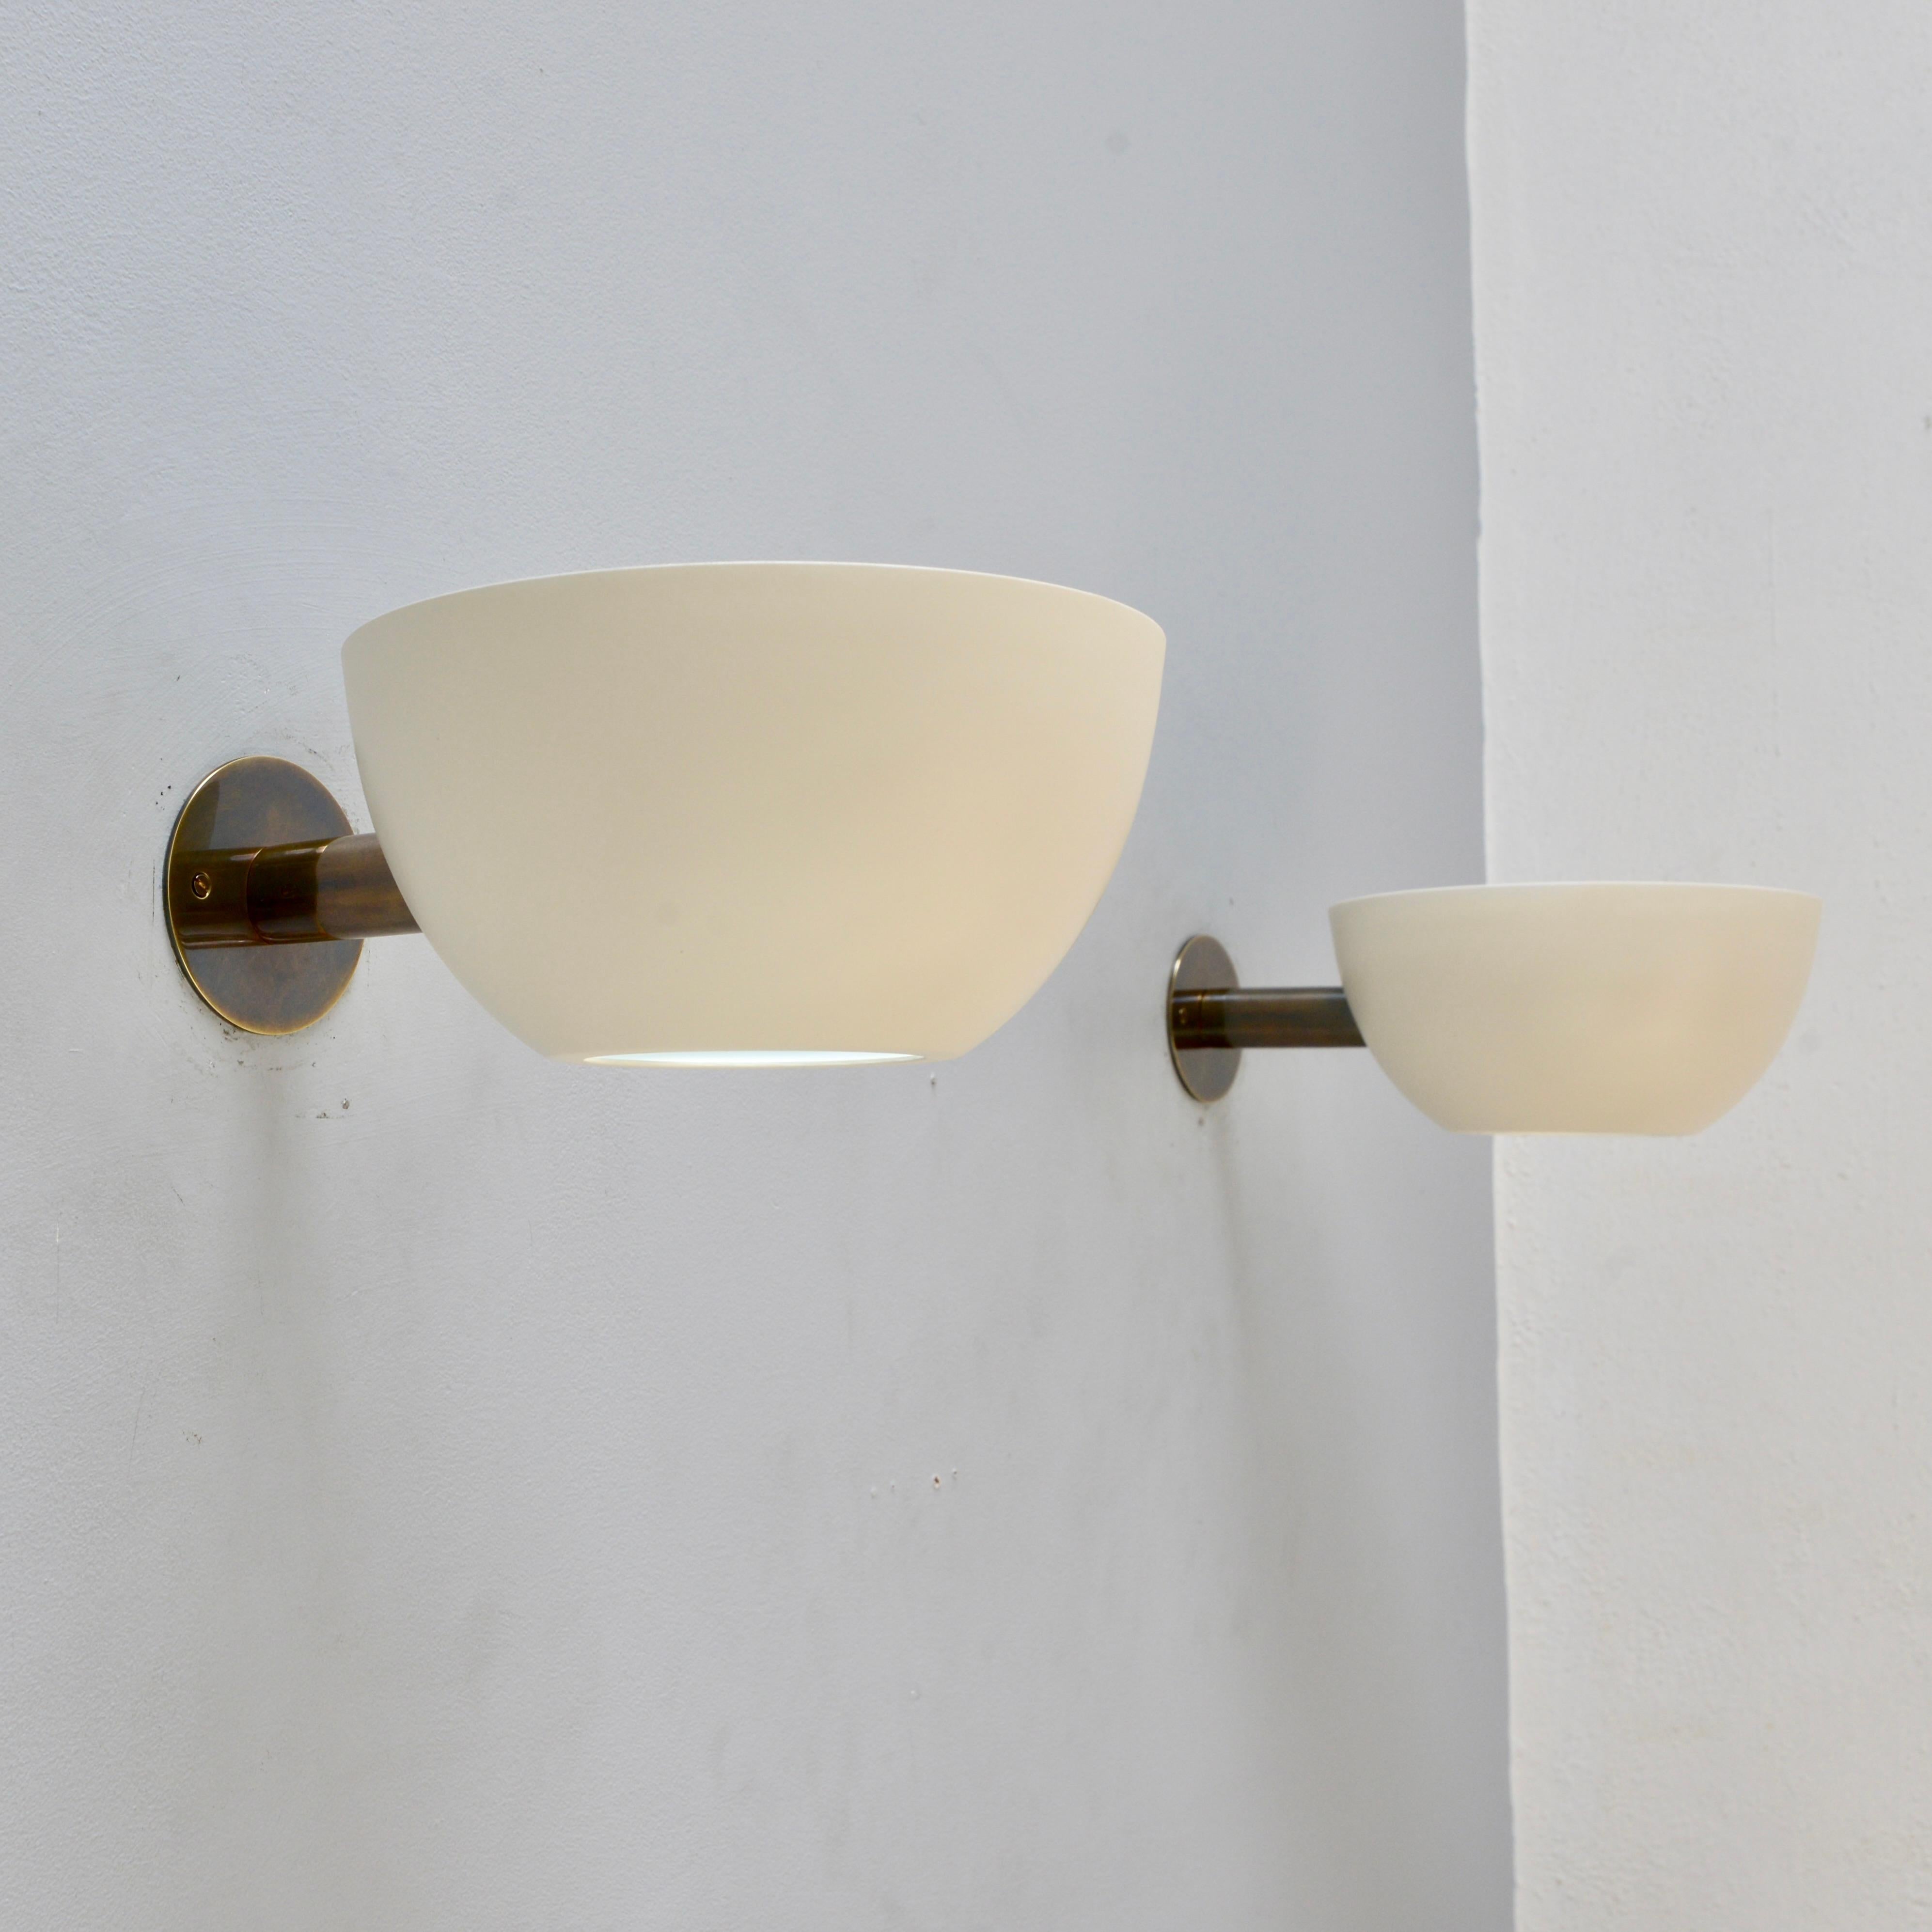 Inspired by 1950s Italian design, this contemporary sconce is a companion piece to our large LUcrown chandelier. Single medium based socket. Painted aluminum shade and patina brass hardware with glass diffuser. Priced individually, multiples